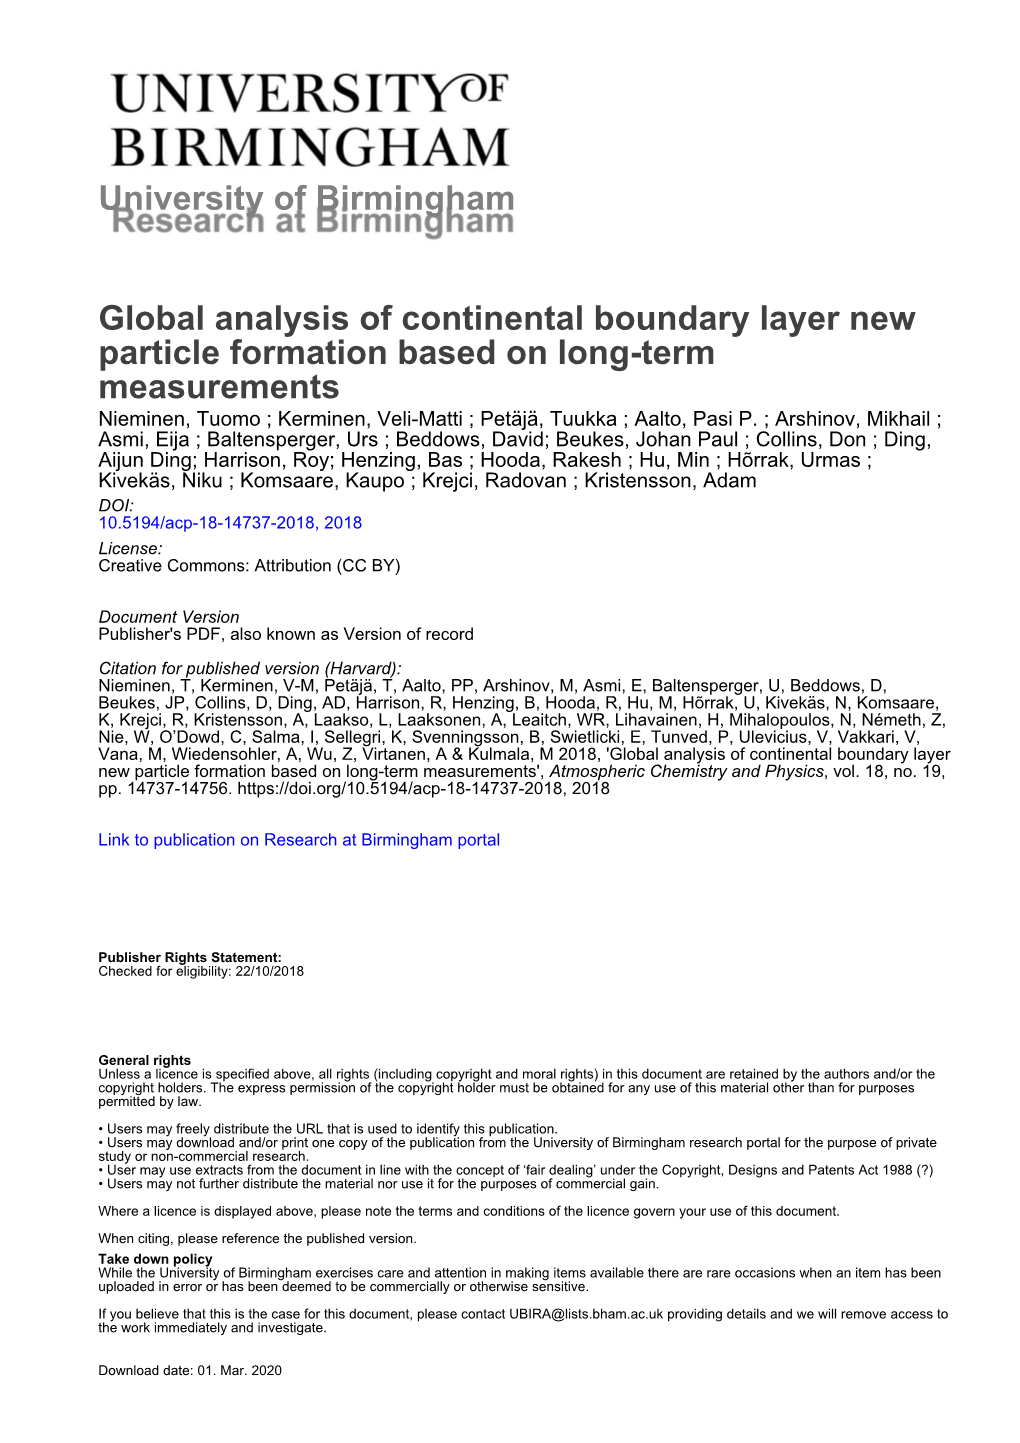 University of Birmingham Global Analysis of Continental Boundary Layer New Particle Formation Based on Long-Term Measurements